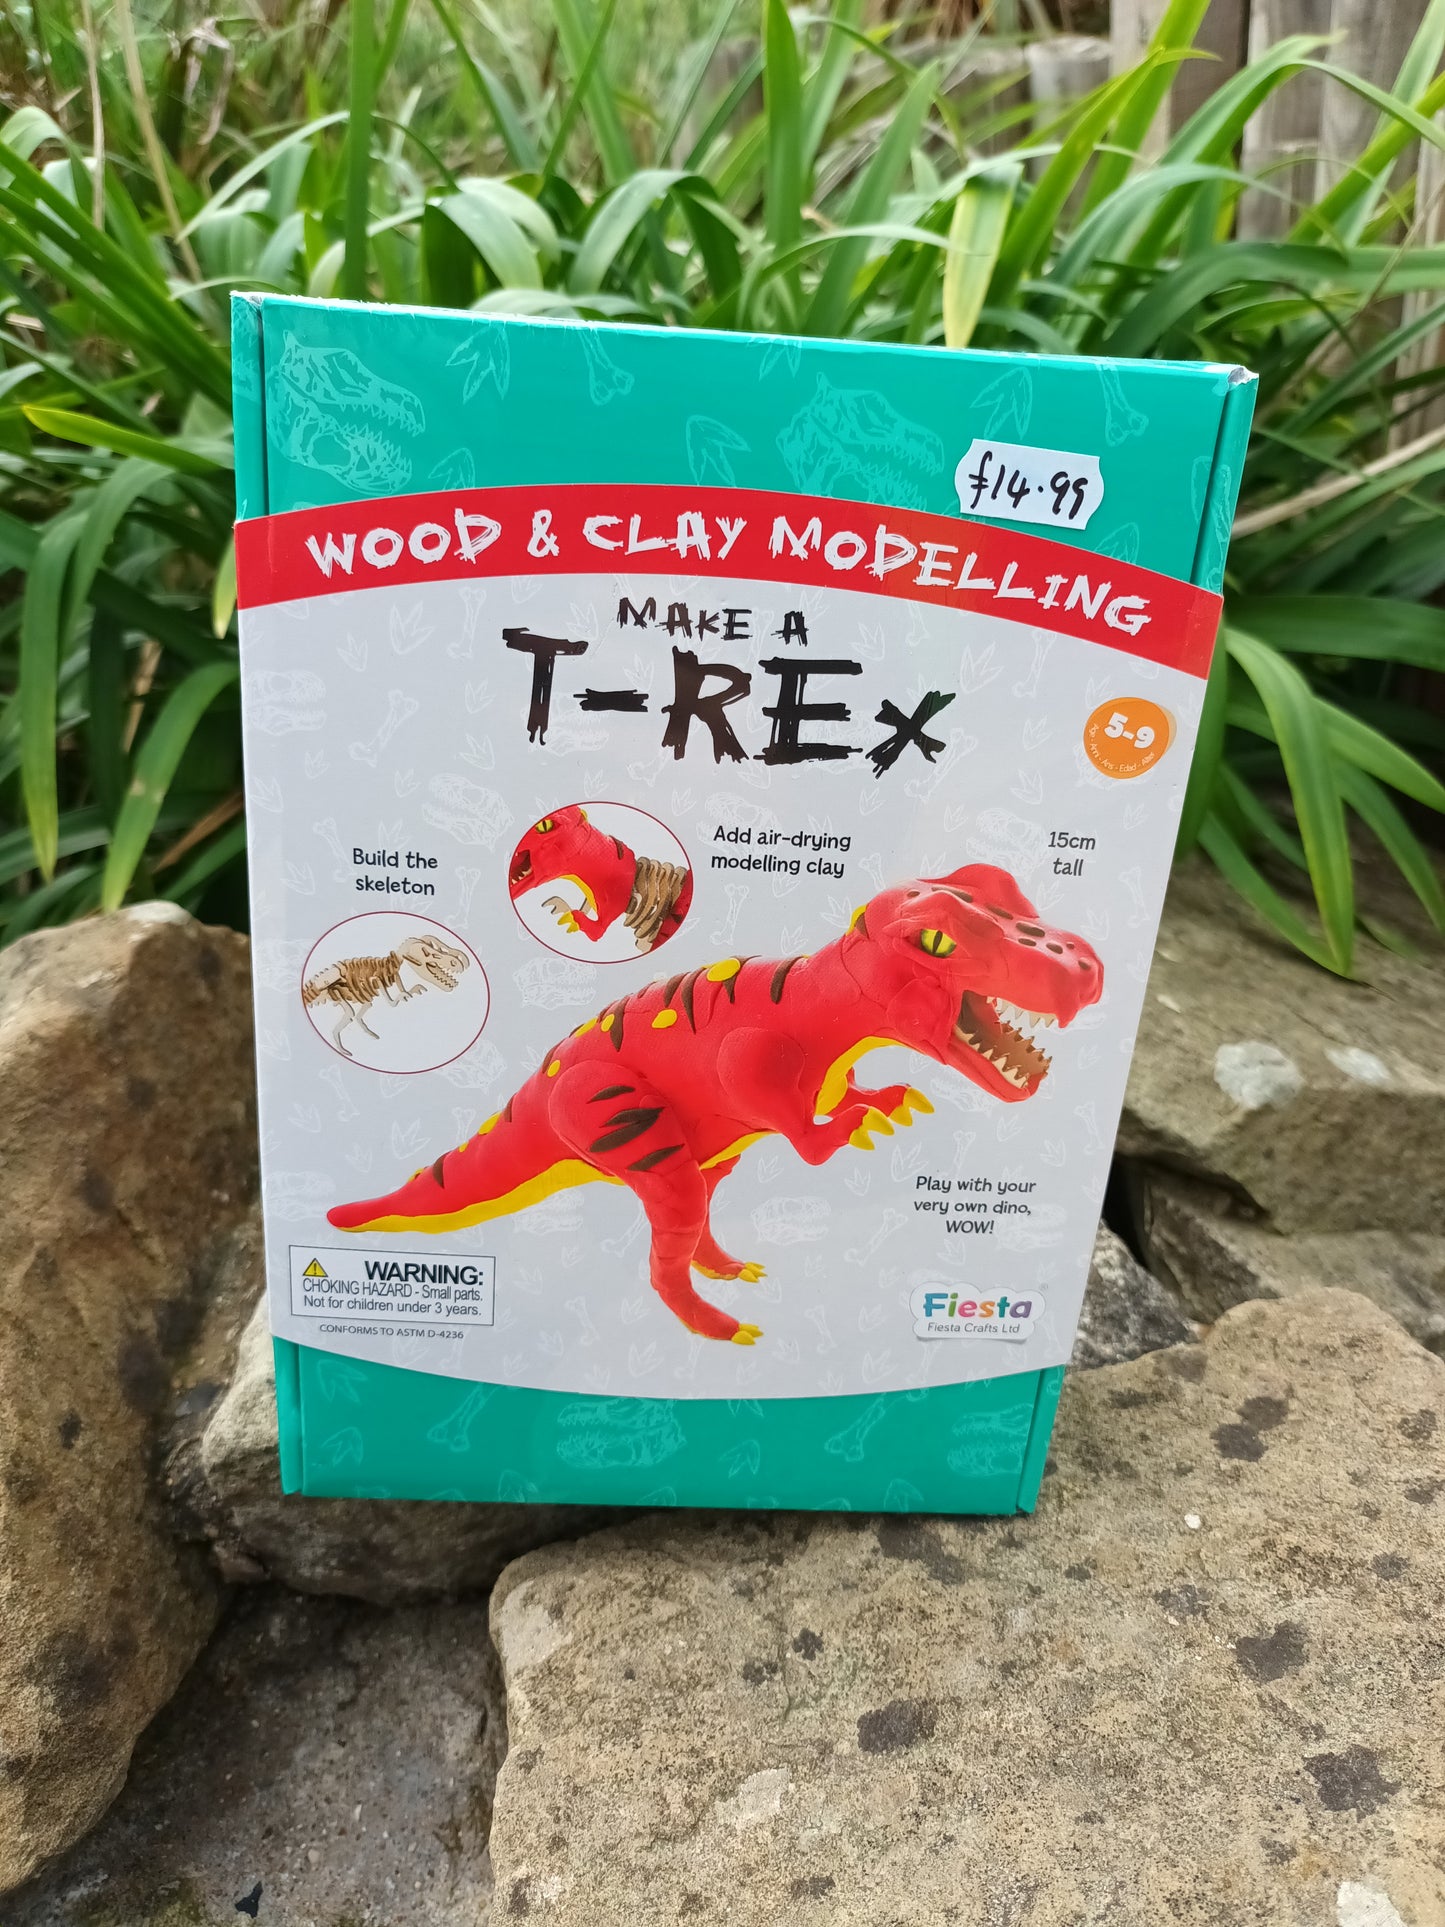 Make a T-Rex - Wood and Clay Modelling